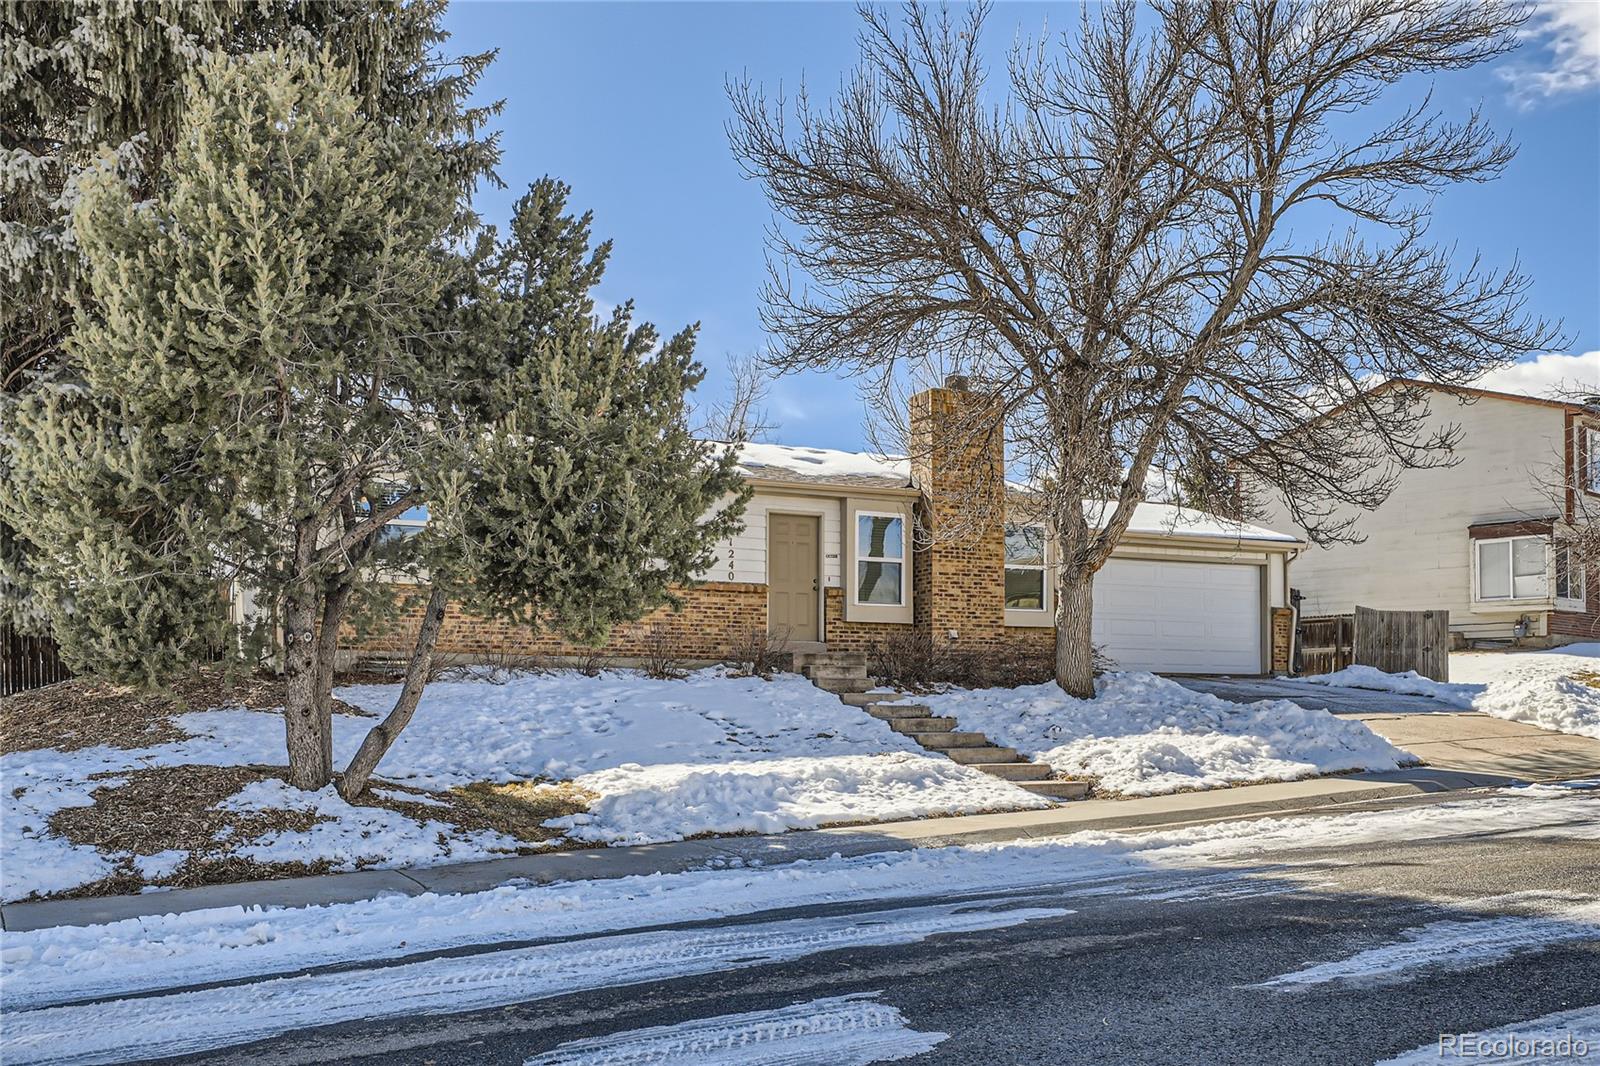 11240 w powers avenue, littleton sold home. Closed on 2024-03-12 for $578,000.